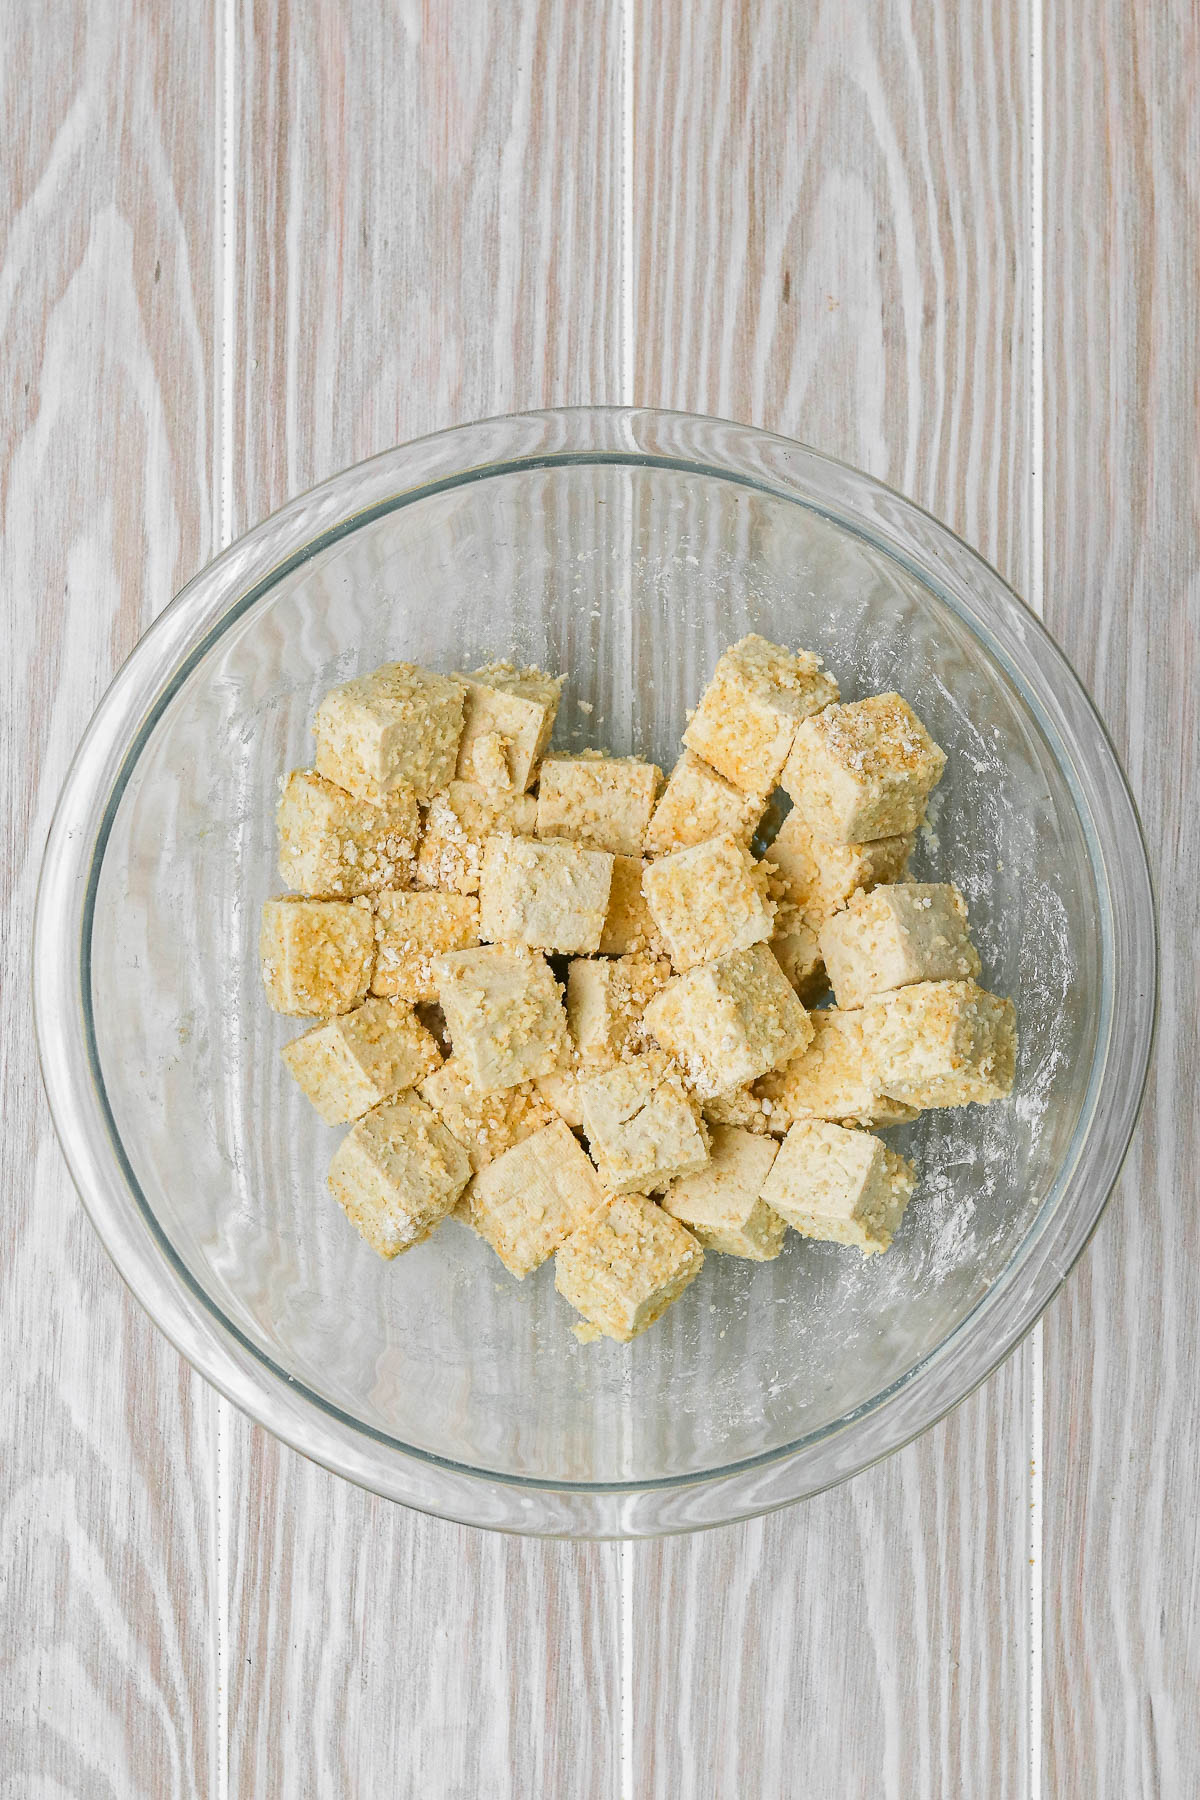 tofu cubes coated in dry mix in a clear bowl.